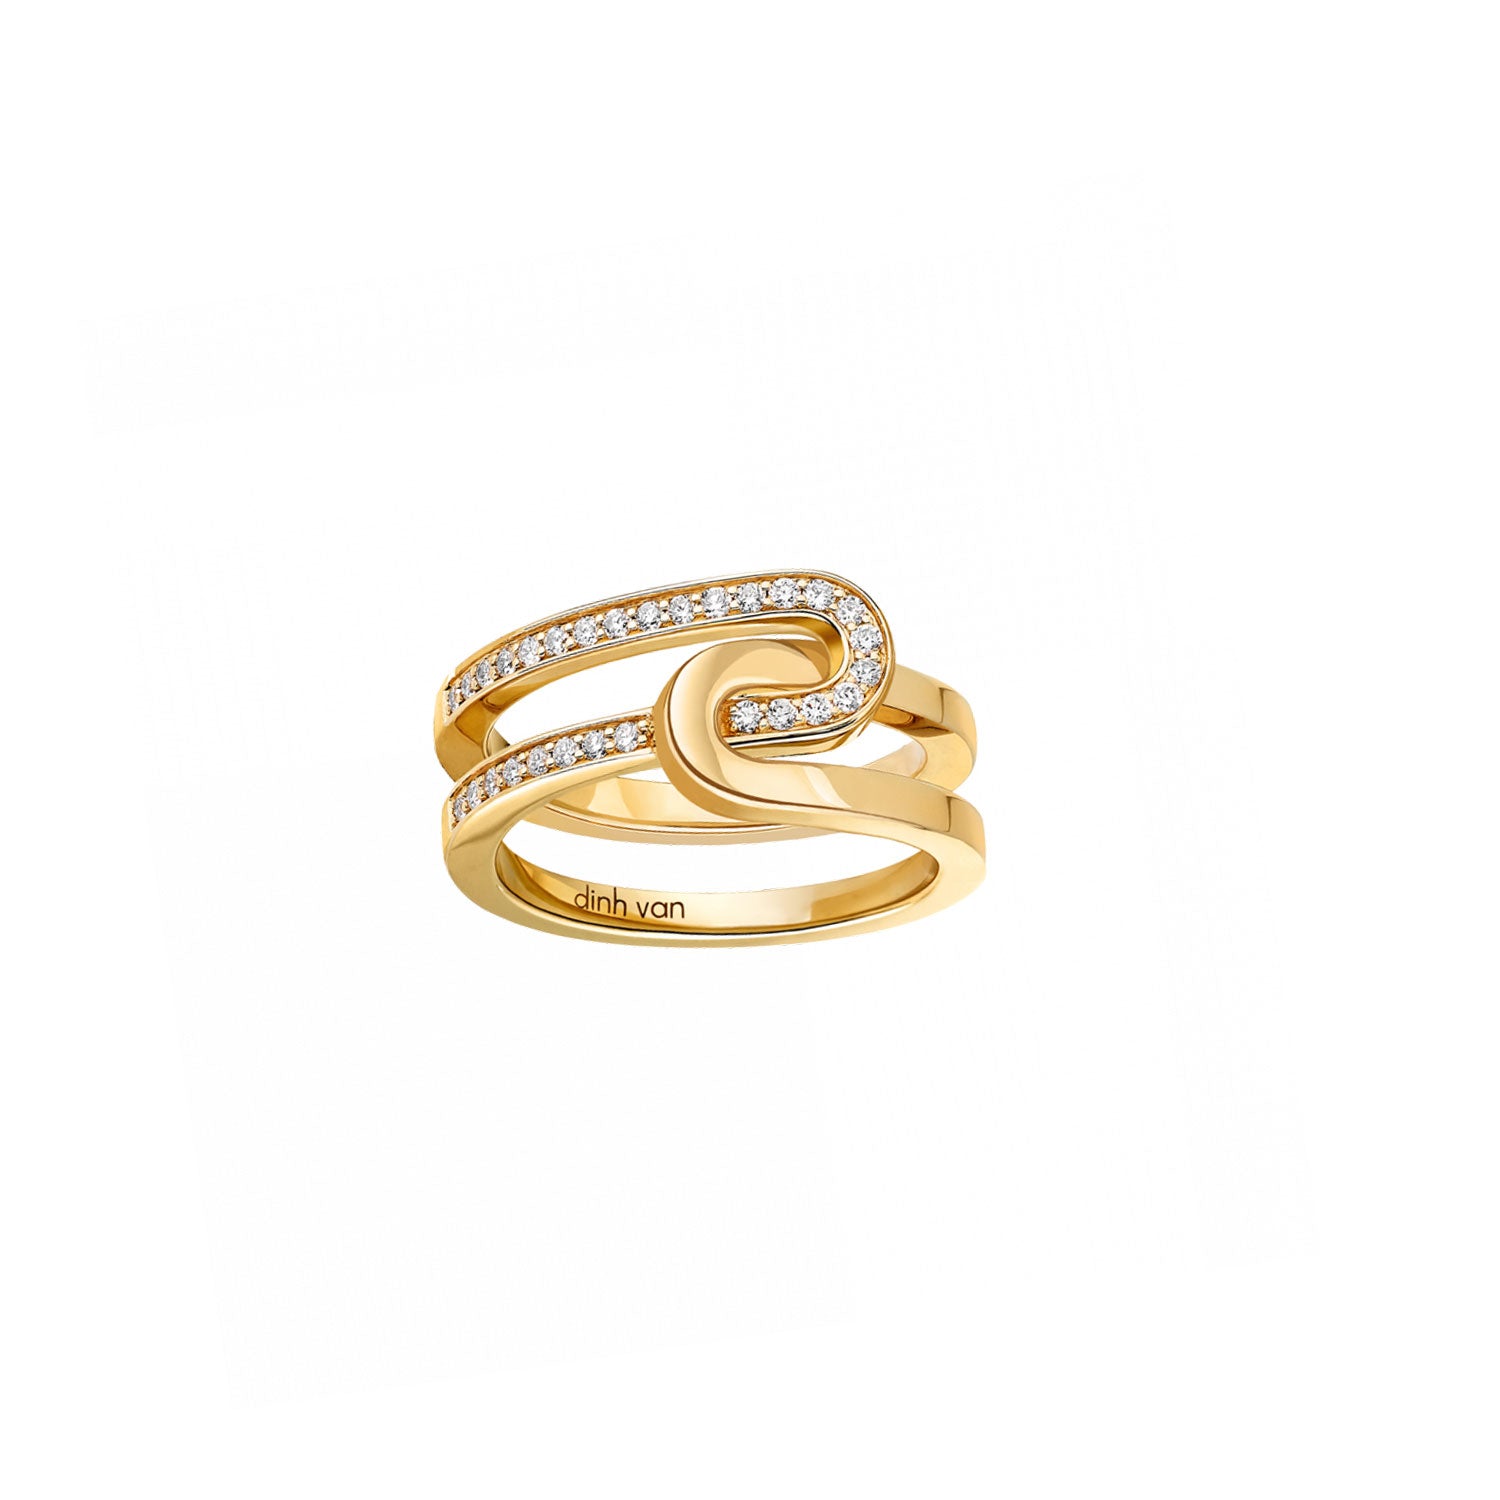 Maillon Star Small Ring in Yellow Gold